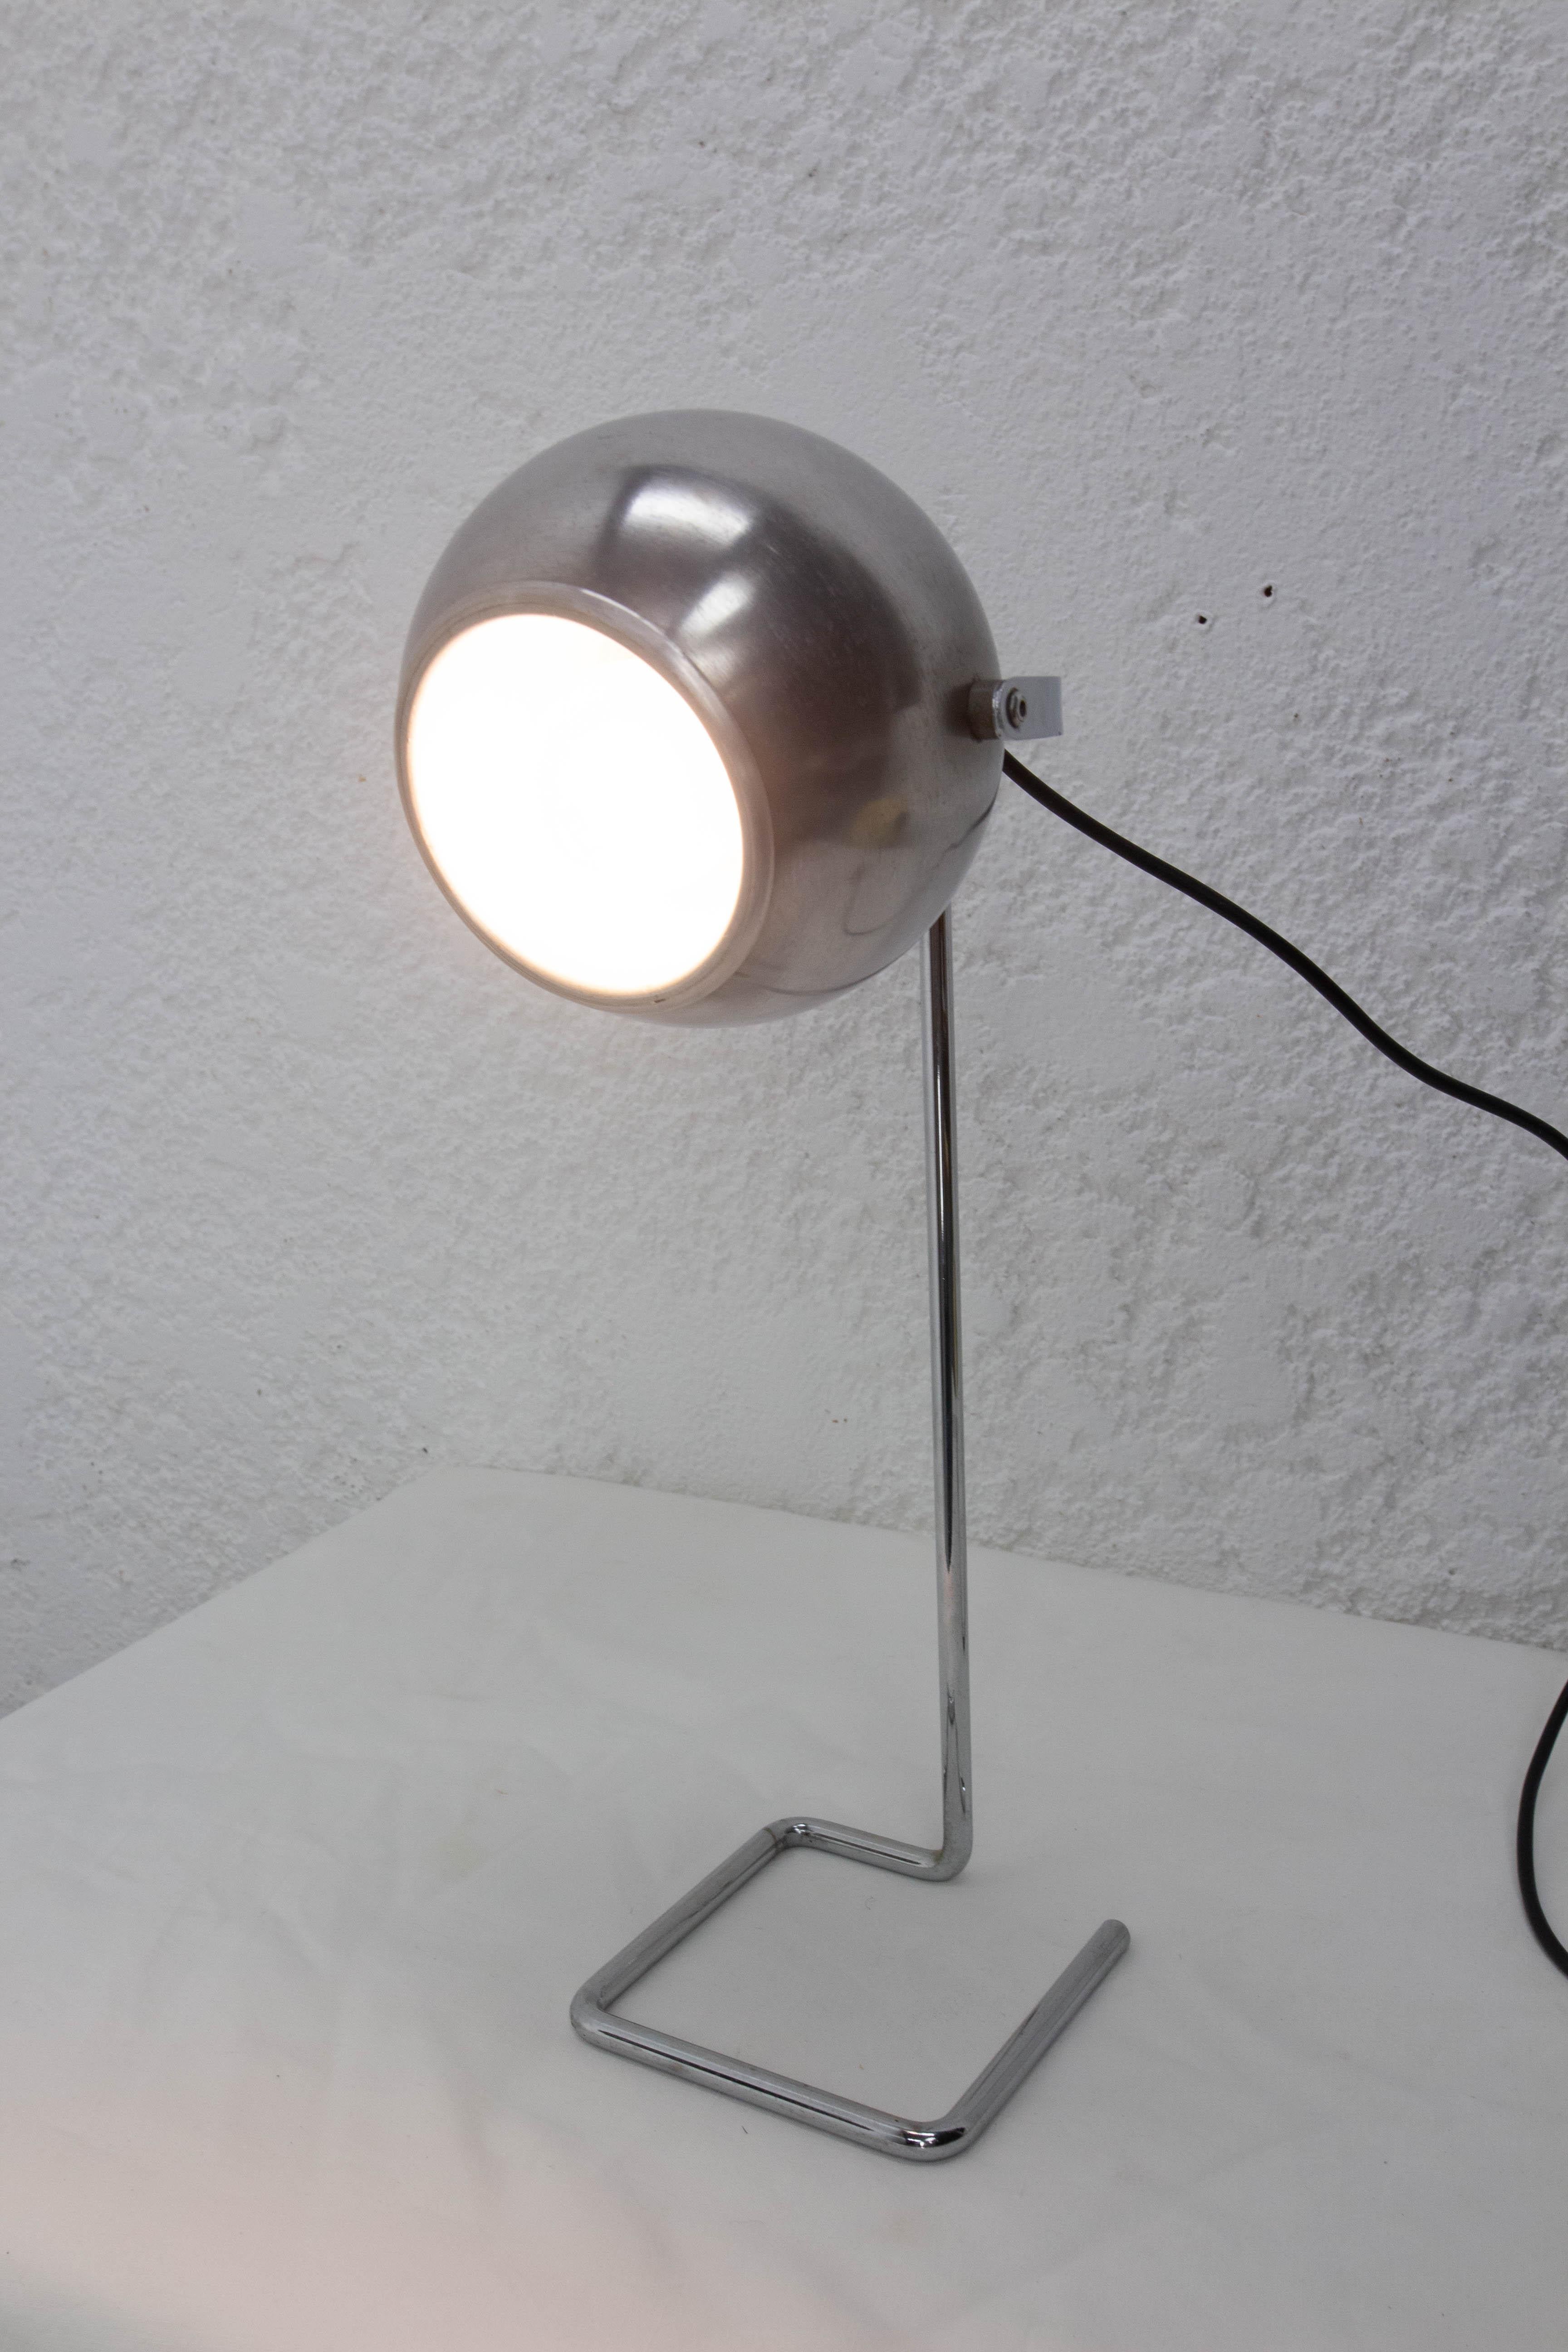 Little desk lamp typical of the vintage years circa 1950
This light is ideal to complete the vintage decoration of a room, especially in small spaces.
The lamp is adjustable in height
Good vintage condition.
These can be rewired to USA and EU or UK